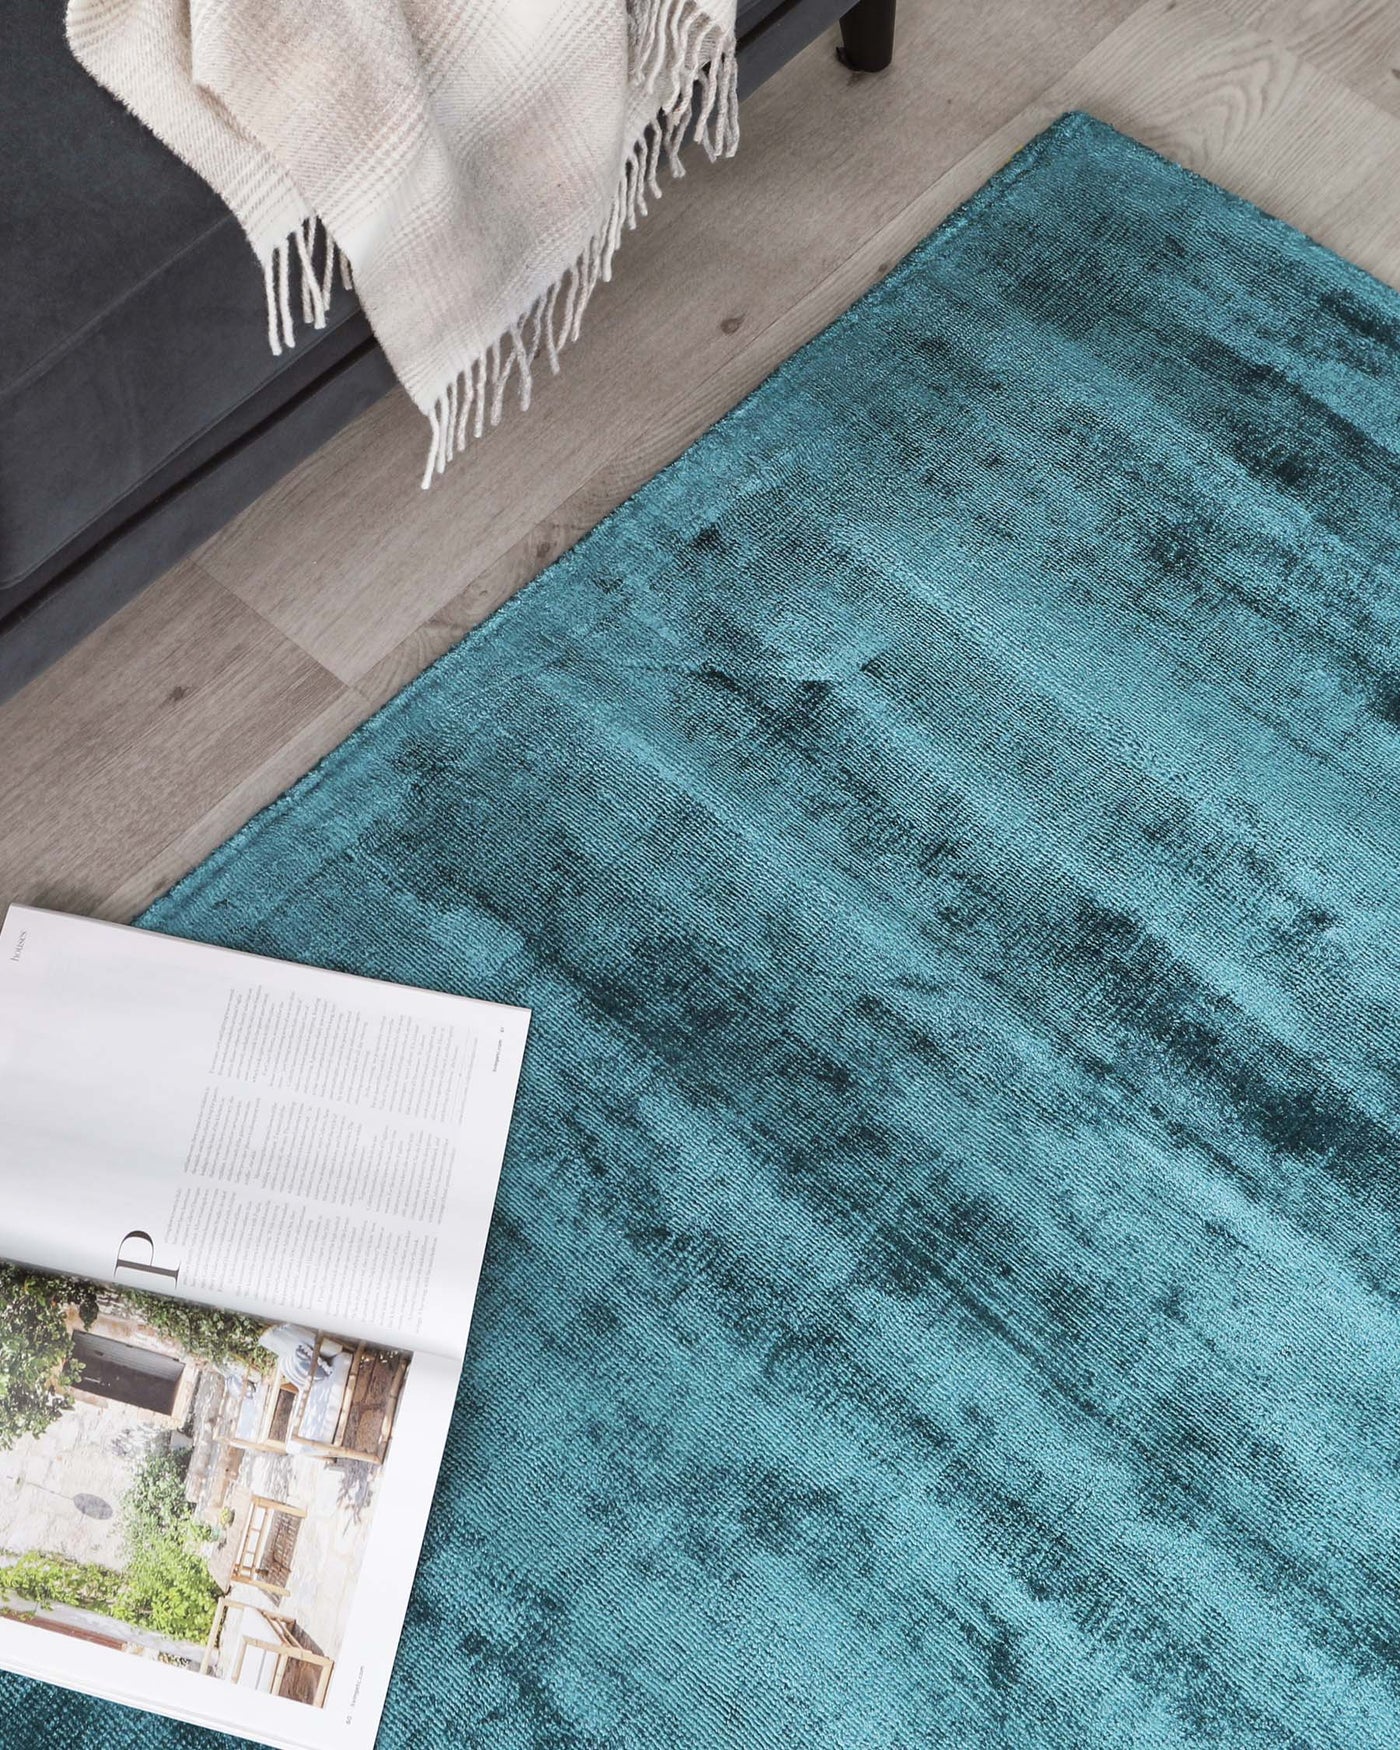 A textured turquoise area rug with a gradient effect, paired with a partial view of a modern sofa's leg covered with a light beige throw blanket with fringes. An open magazine rests on the rug.